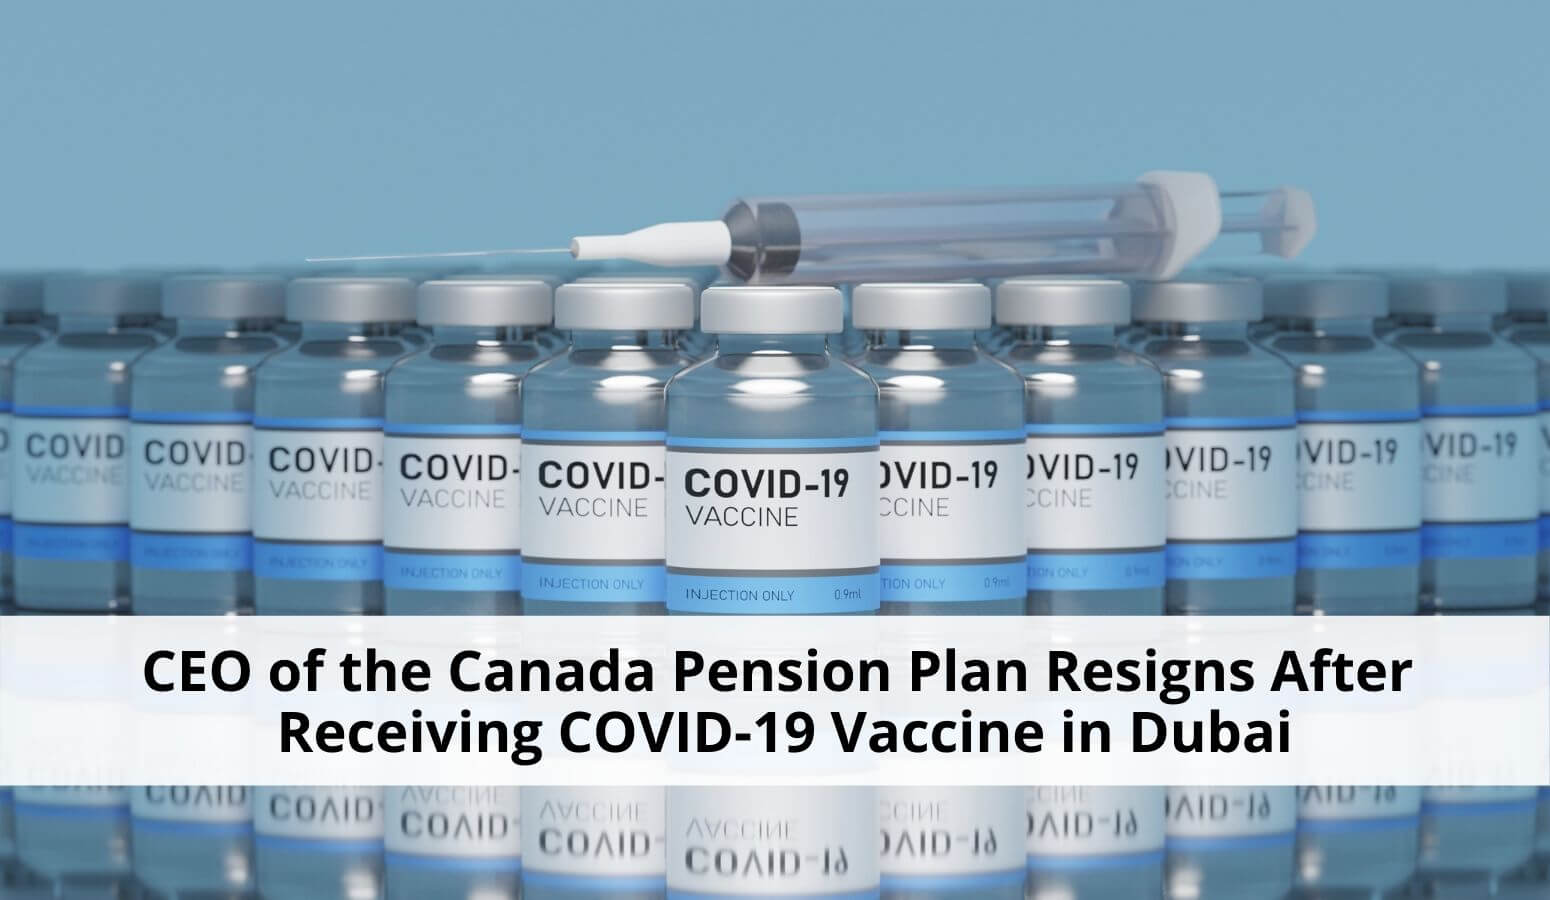 Featured image for “CEO of the Canada Pension Plan Resigns After Receiving COVID-19 Vaccine in Dubai”